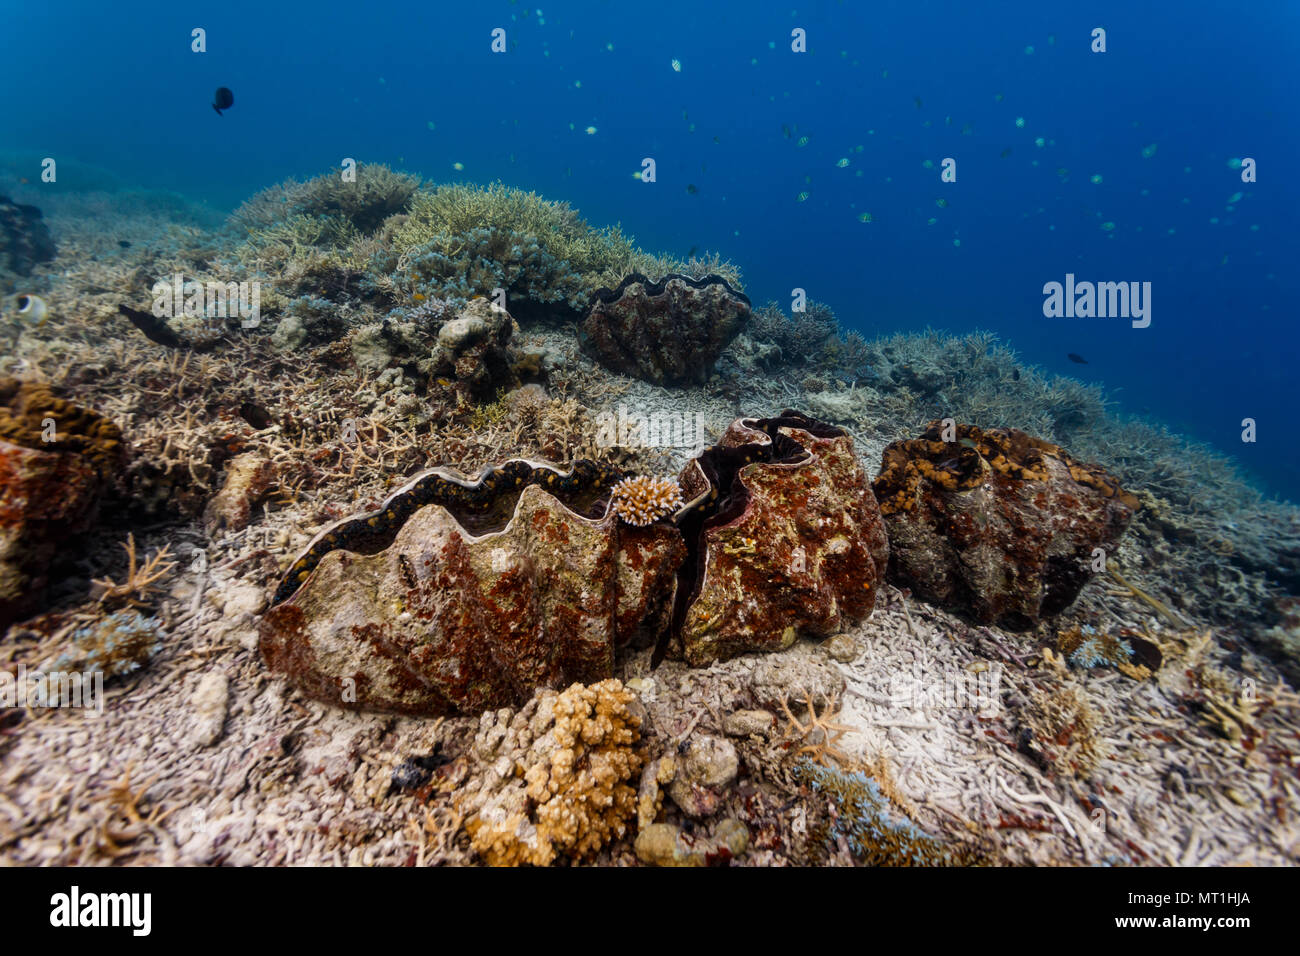 Closeup of closed and open giant clams on coral reef Stock Photo